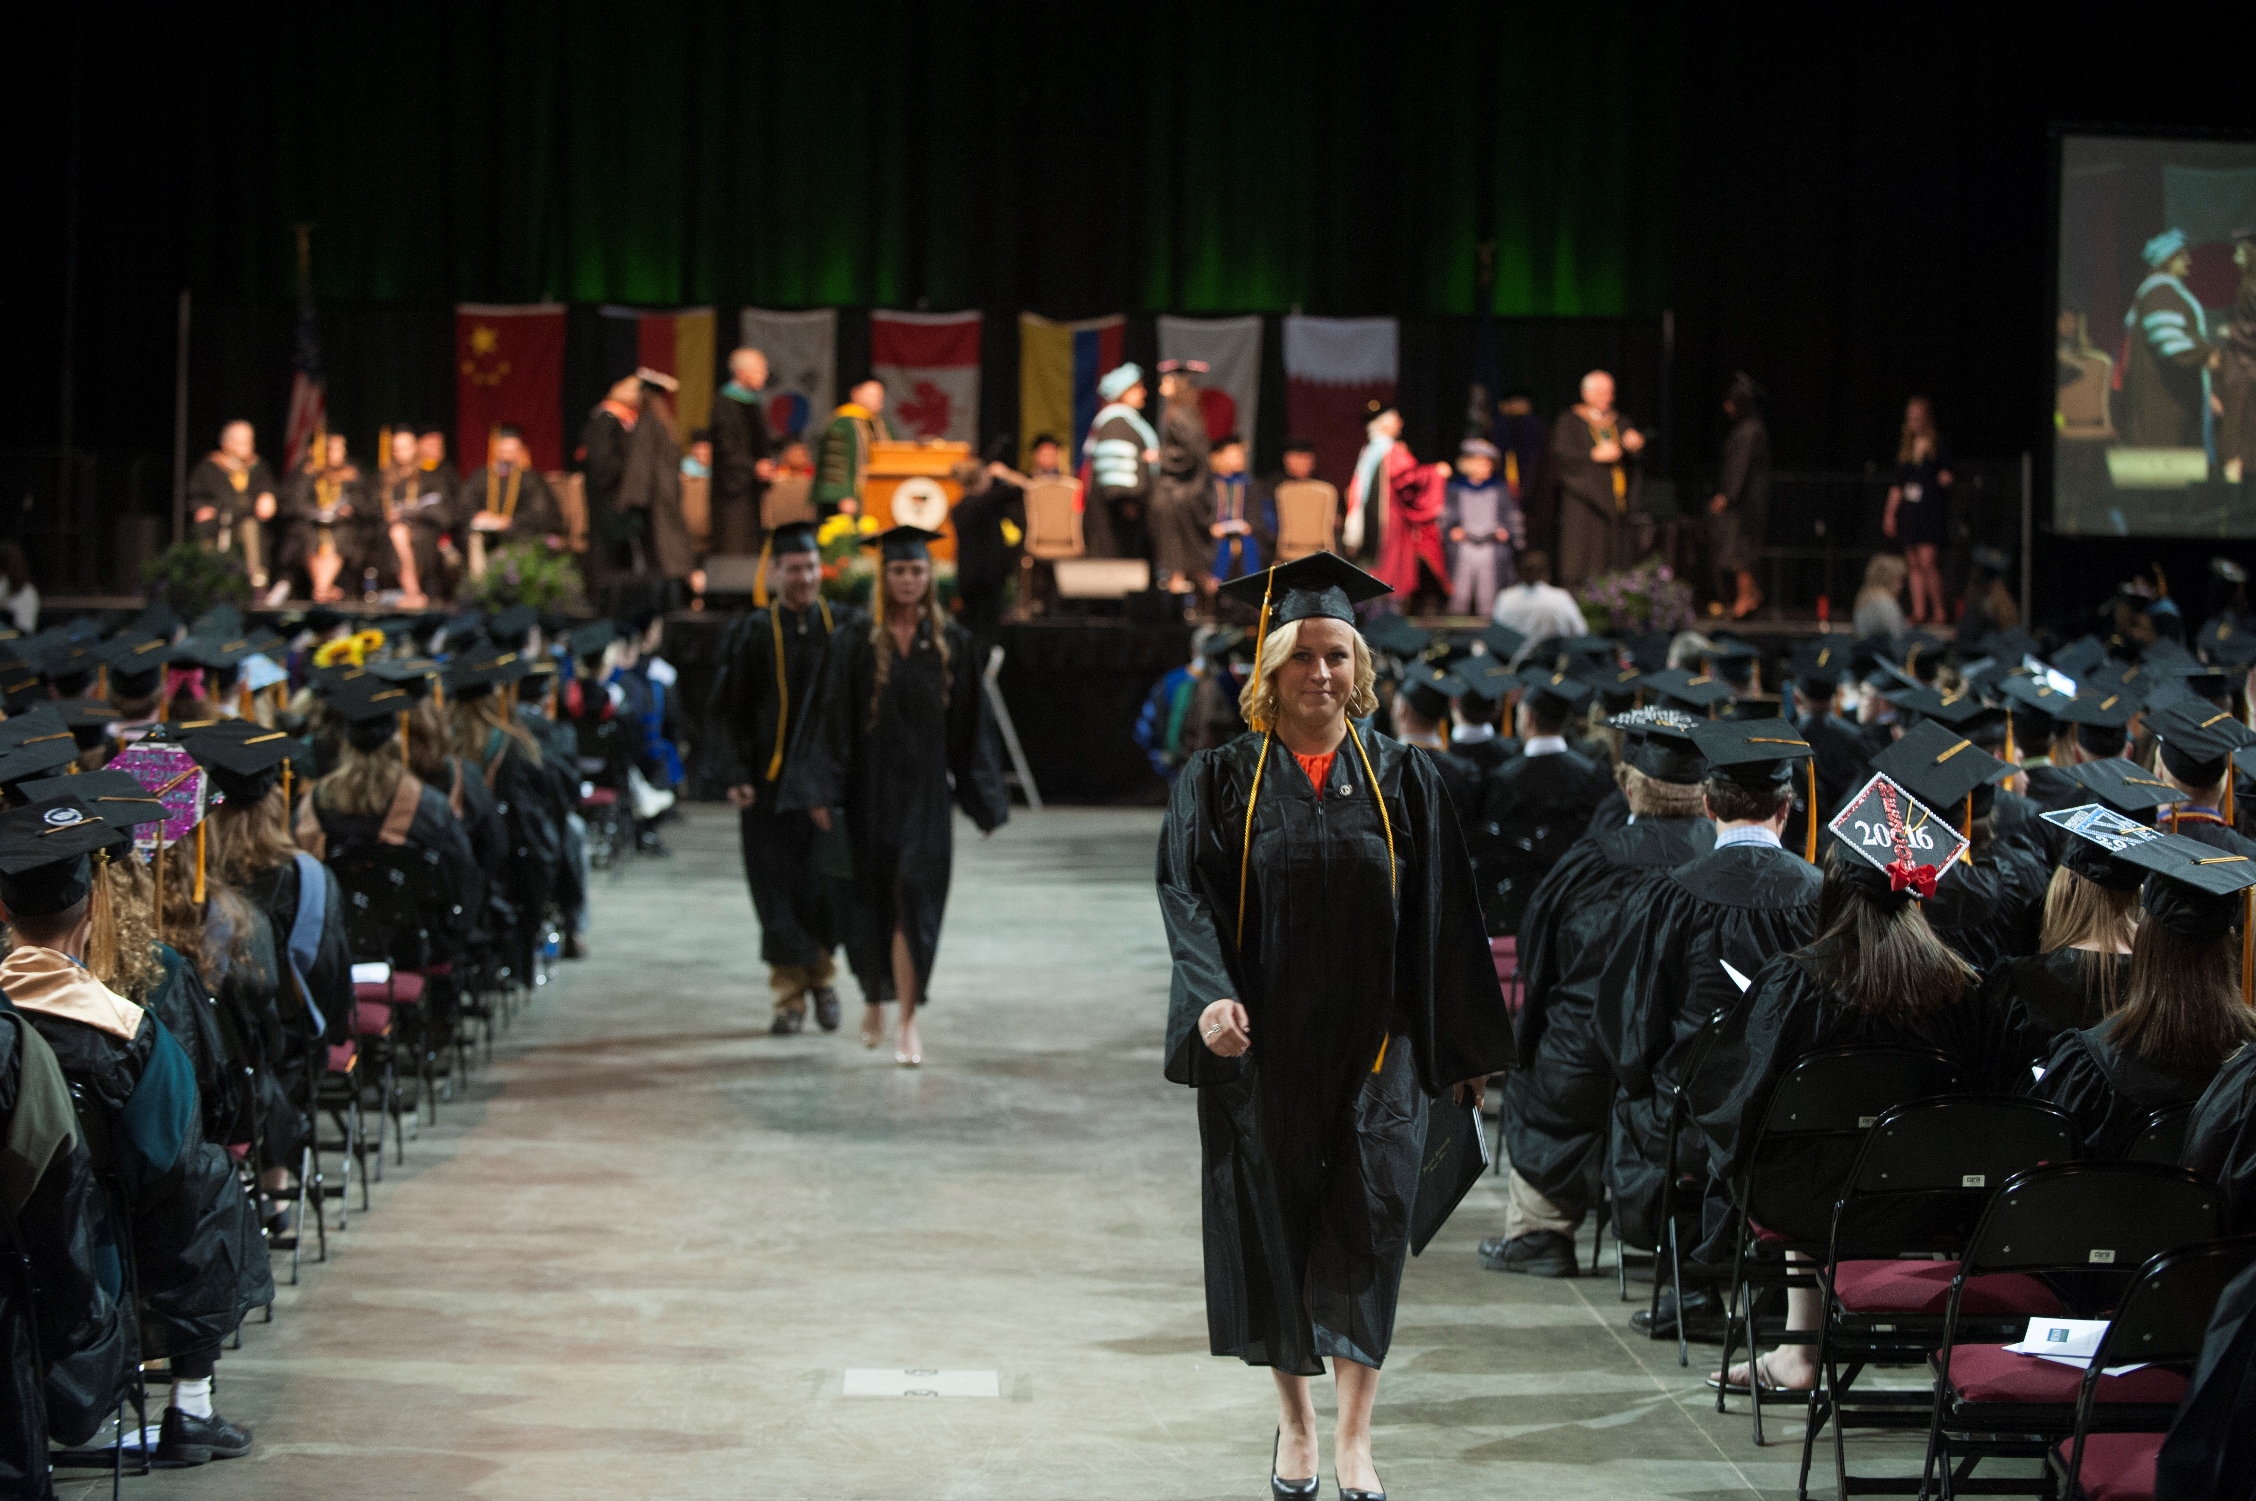 Degrees will be presented to College of Business, College of Health and Education, College of Science and Humanities, New England School of Communications and School of Pharmacy students.